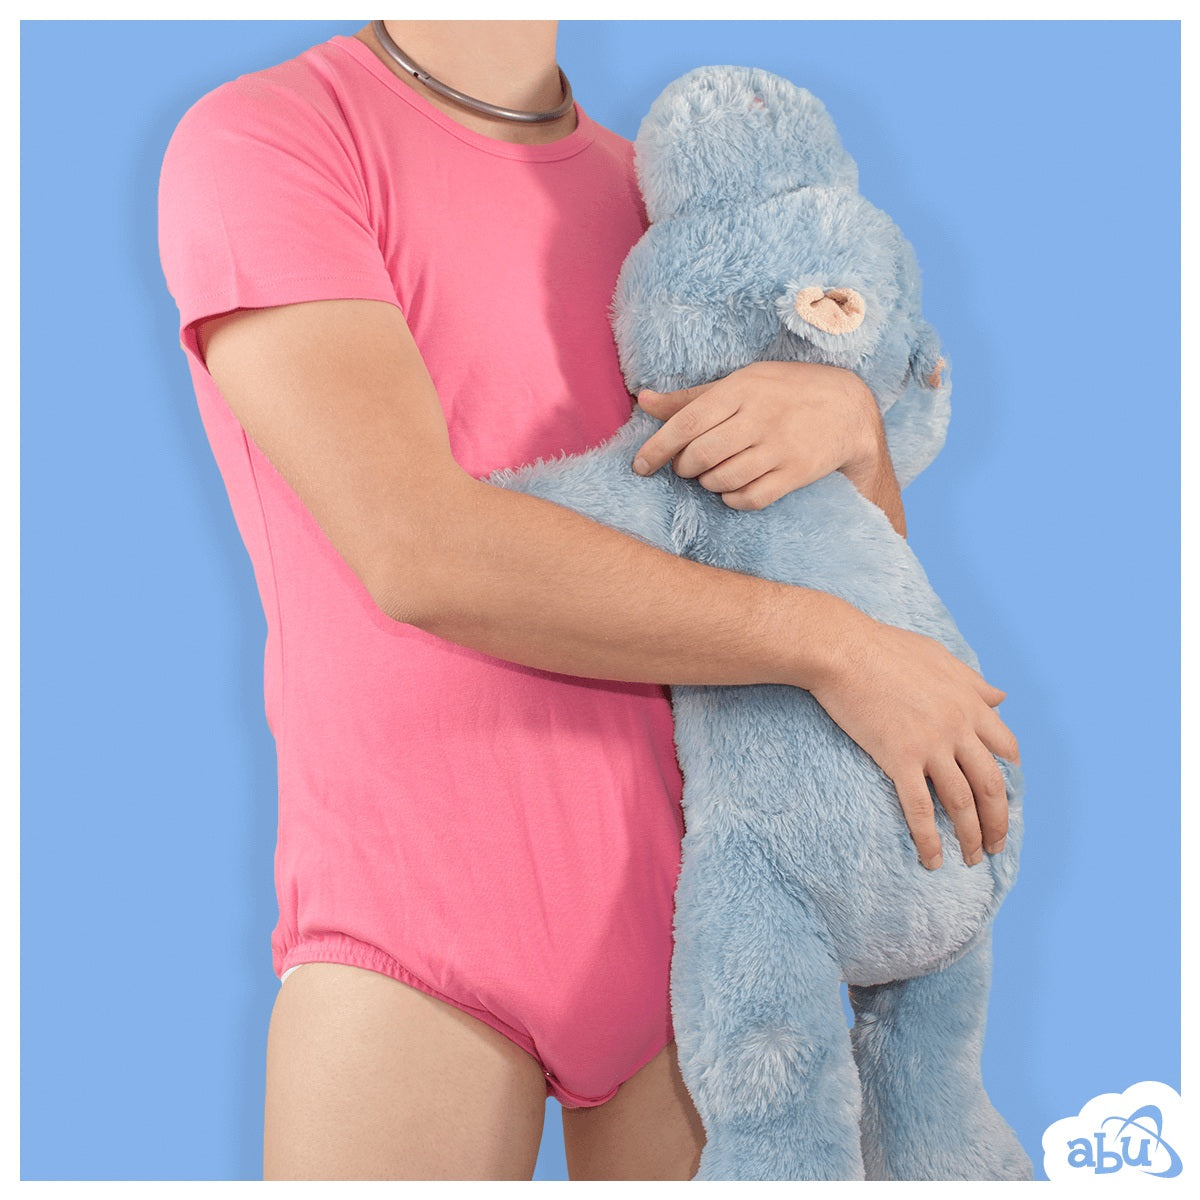 Model wearing pink diapersuit, with disposable diaper worn underneath, holding a stuffed hippo